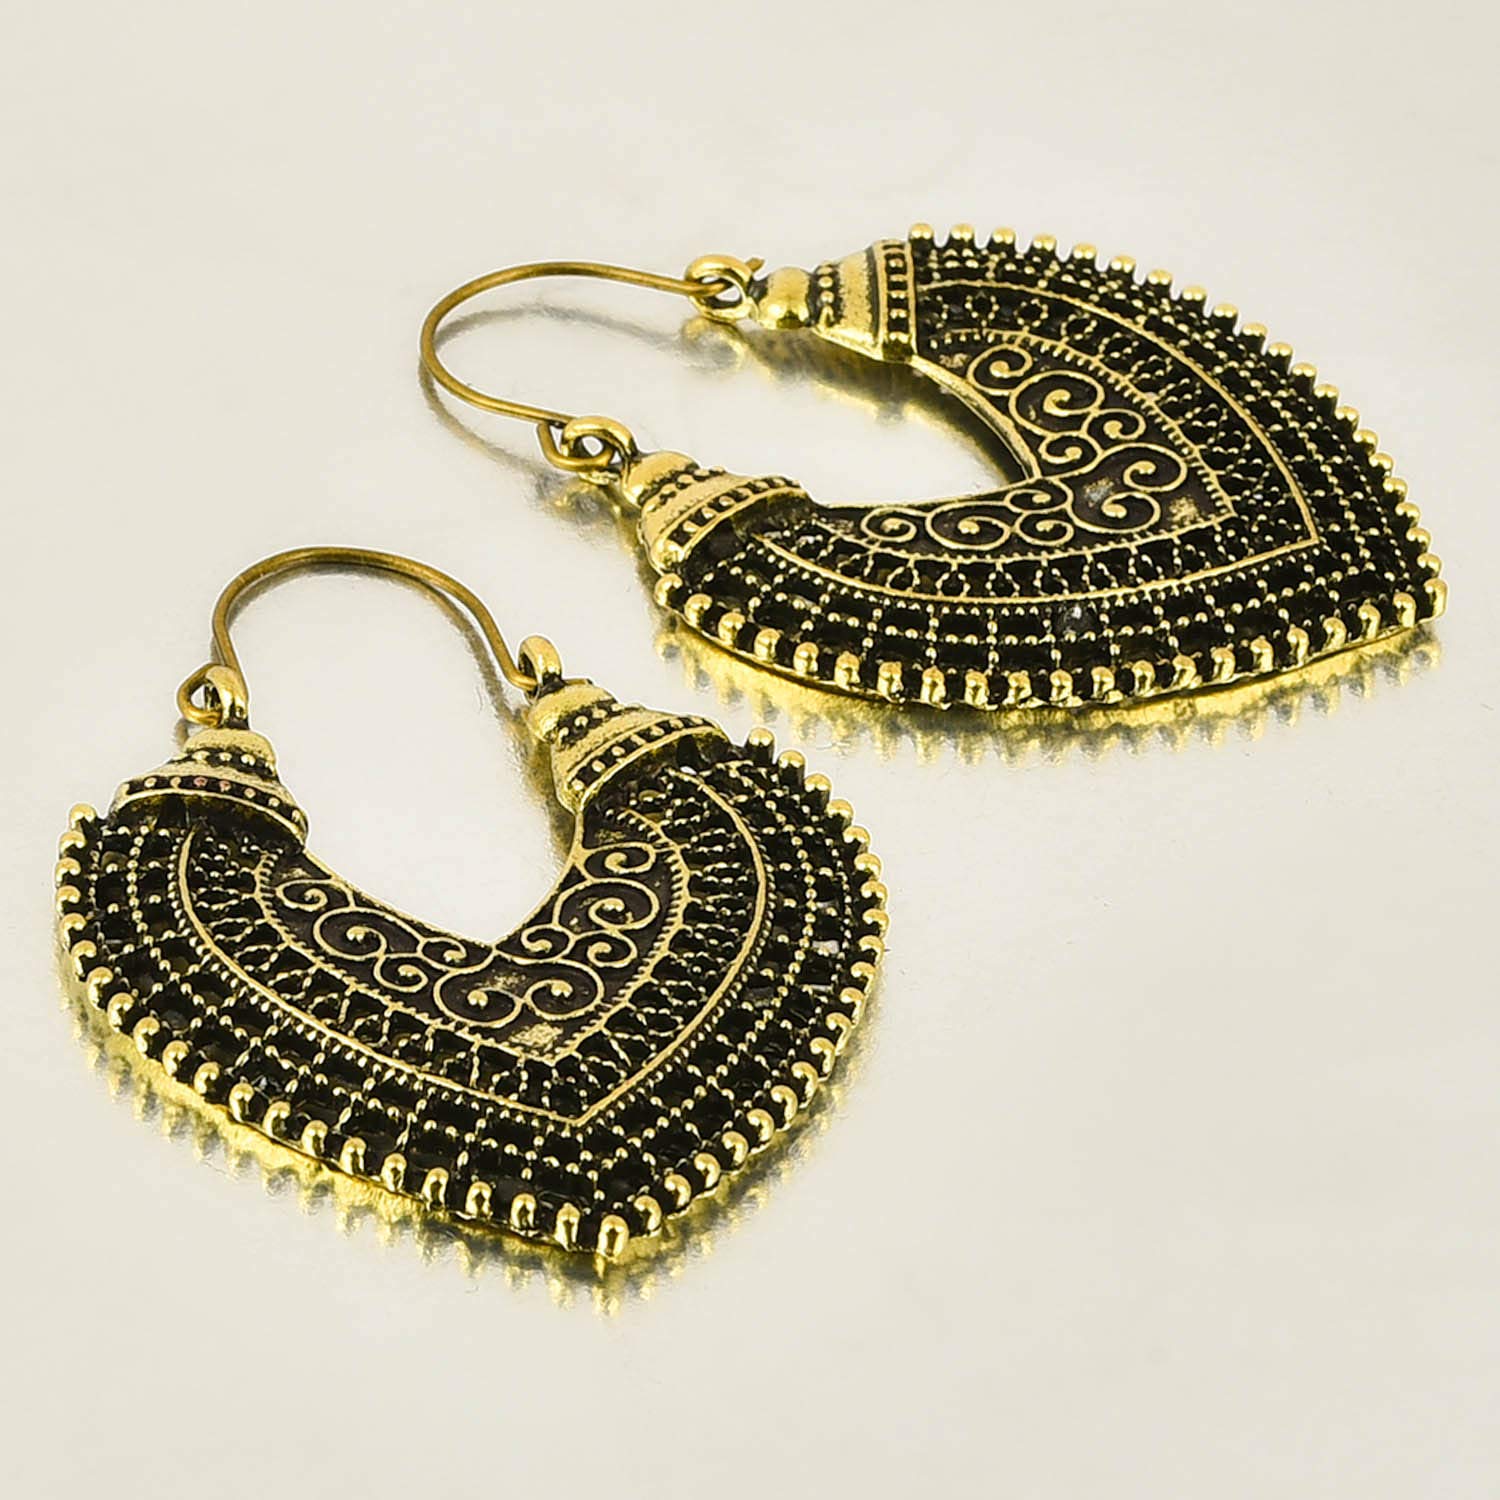 Yellow Chimes Vintage Indian Fashion Oxidized Gold Plated Metal Chandbali Earring for Women and Girls